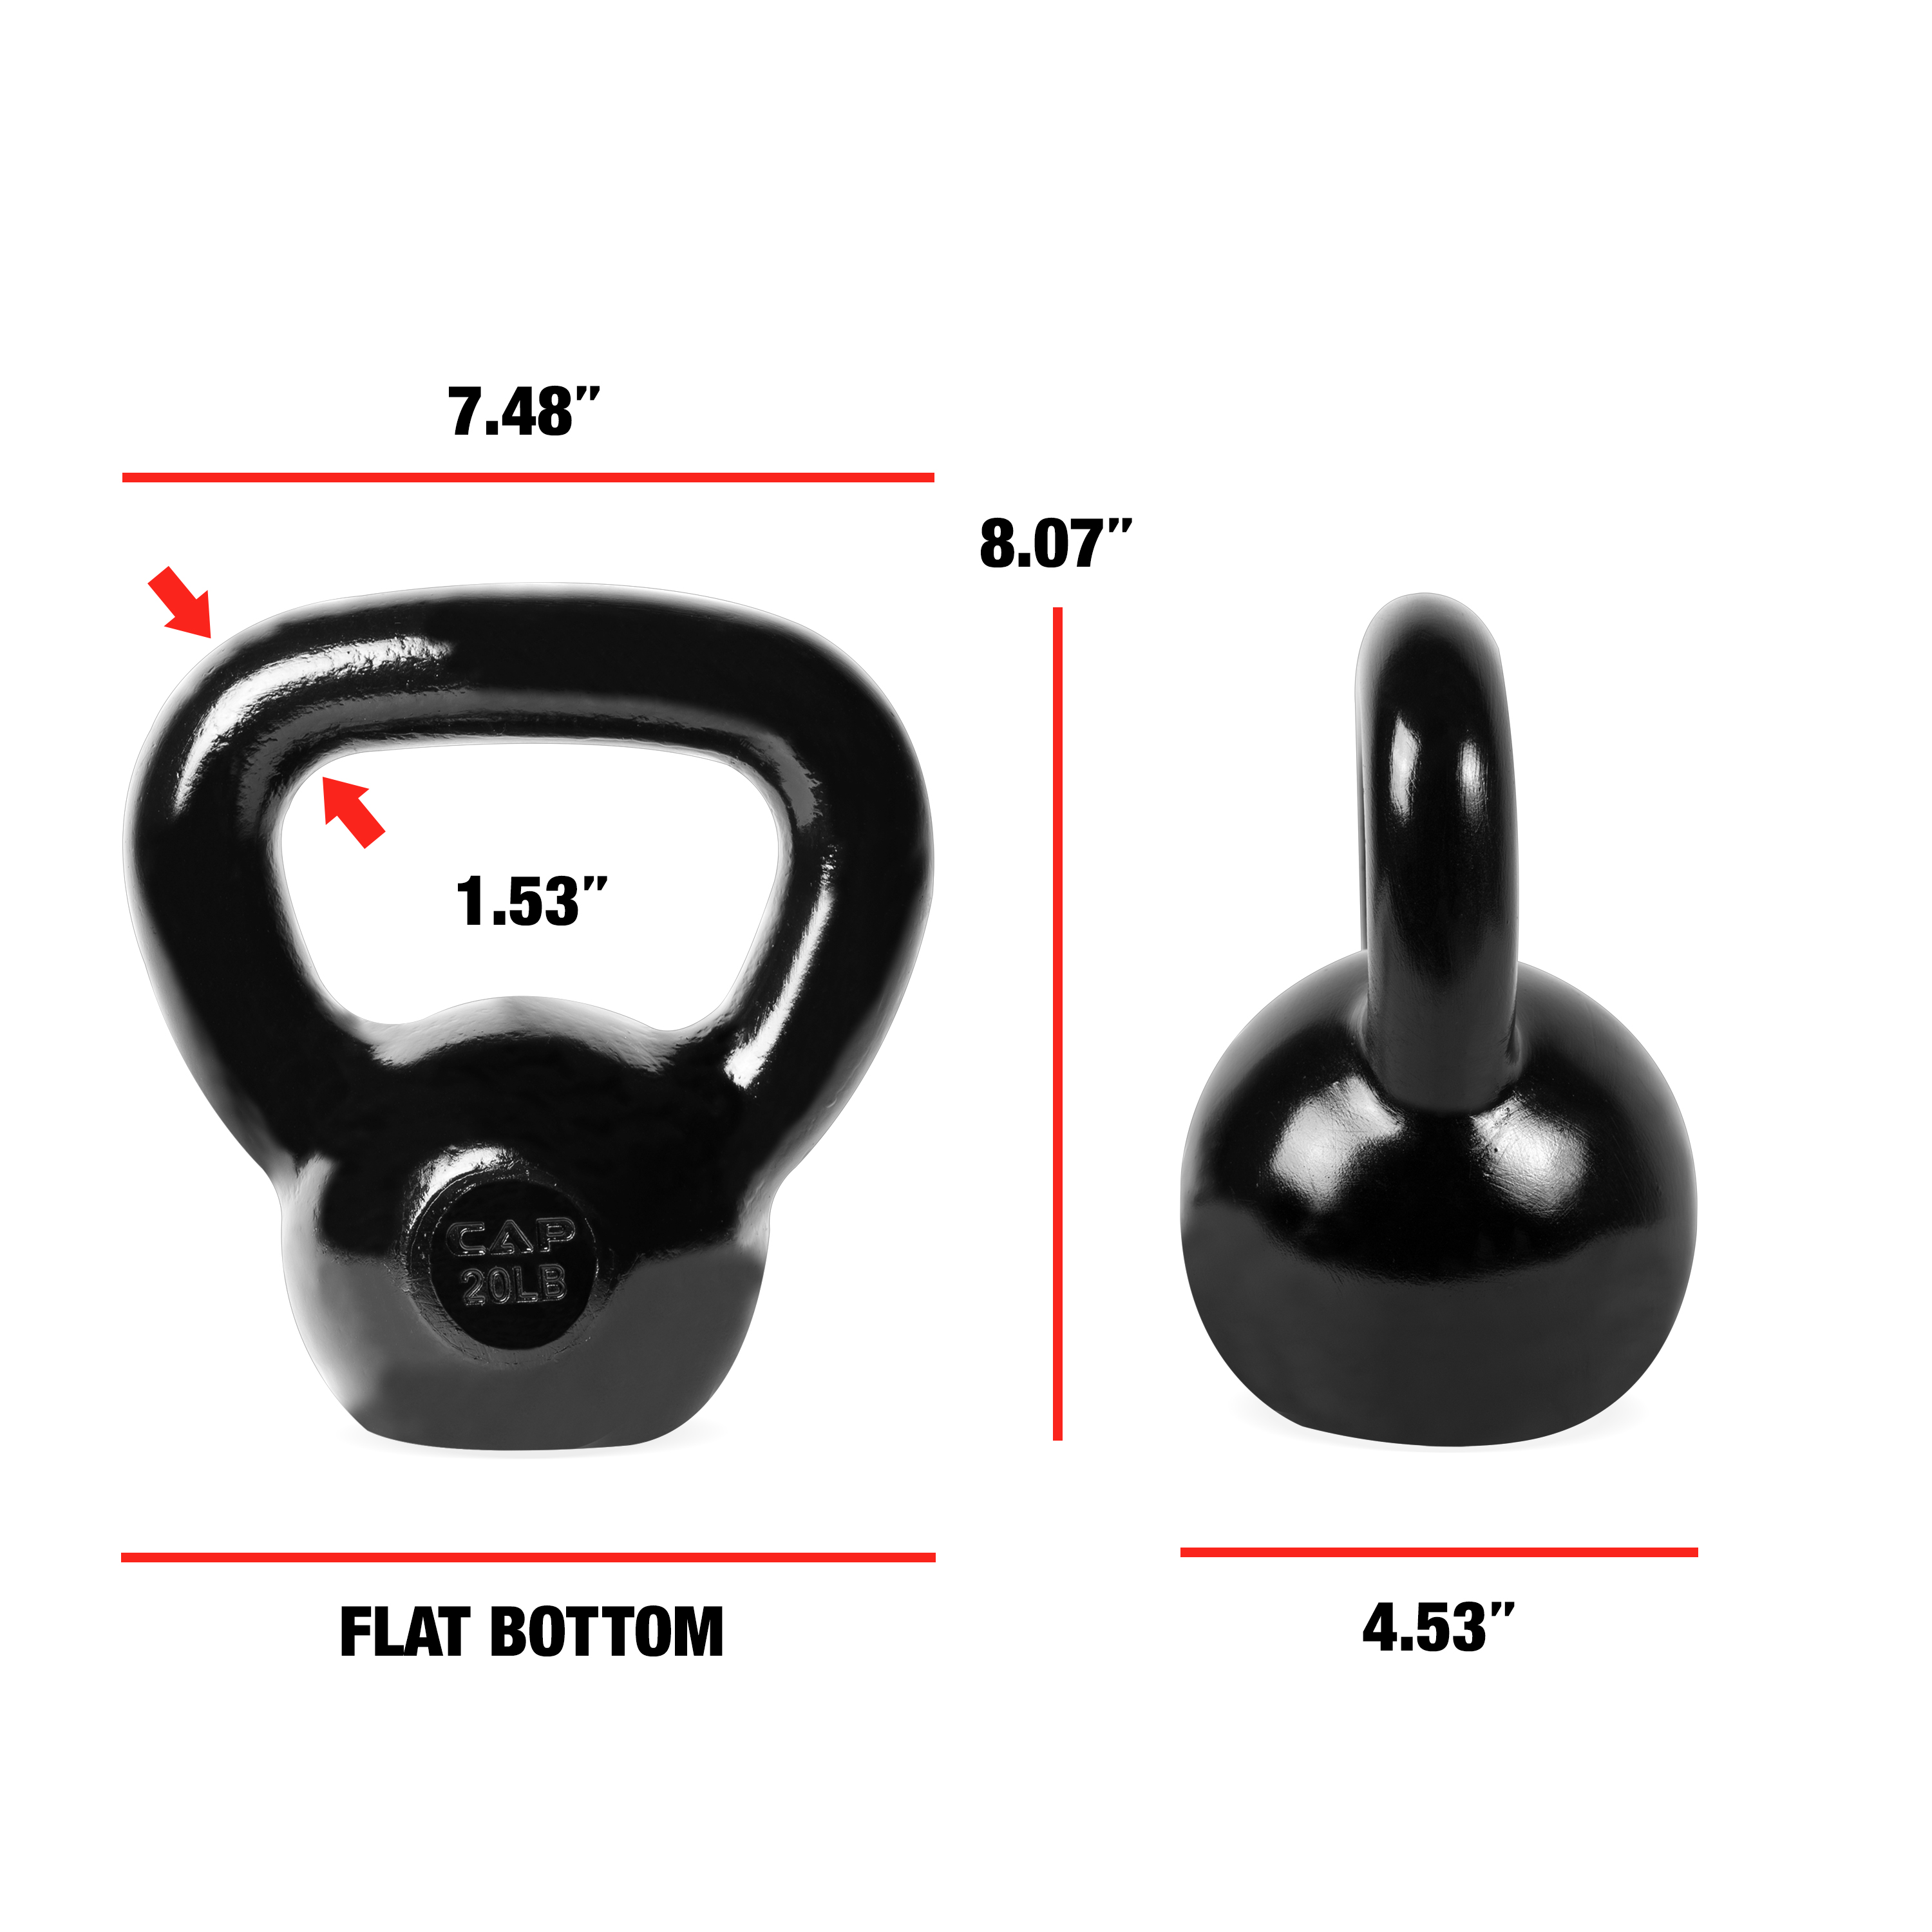 CAP Barbell Cast Iron Kettlebell, Black 20LBS - image 2 of 8